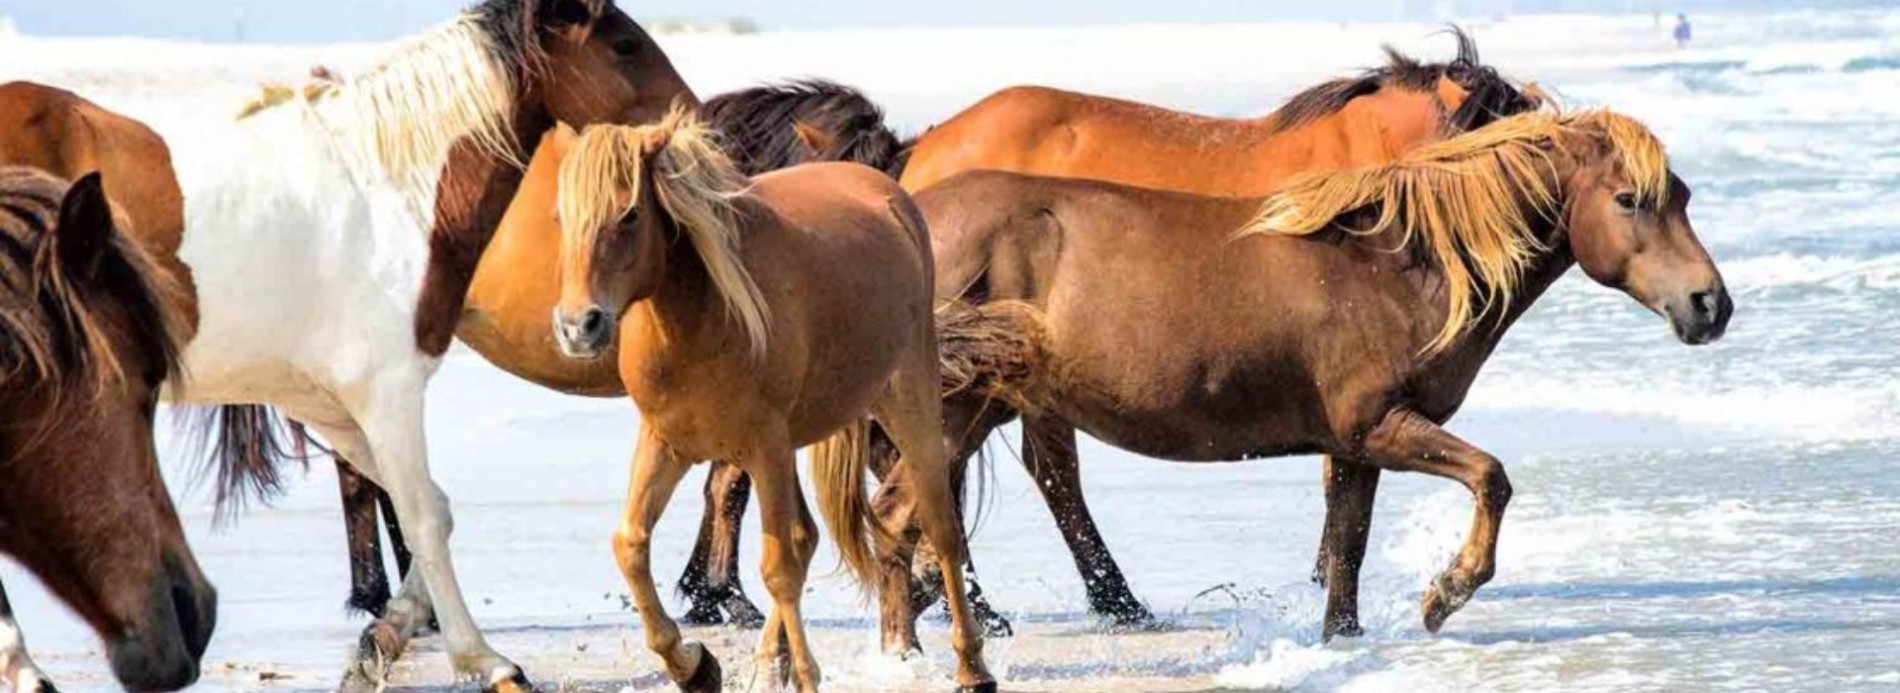 Take a Day Trip to Assateague Island When Staying in Ocean City, MD Feature Image